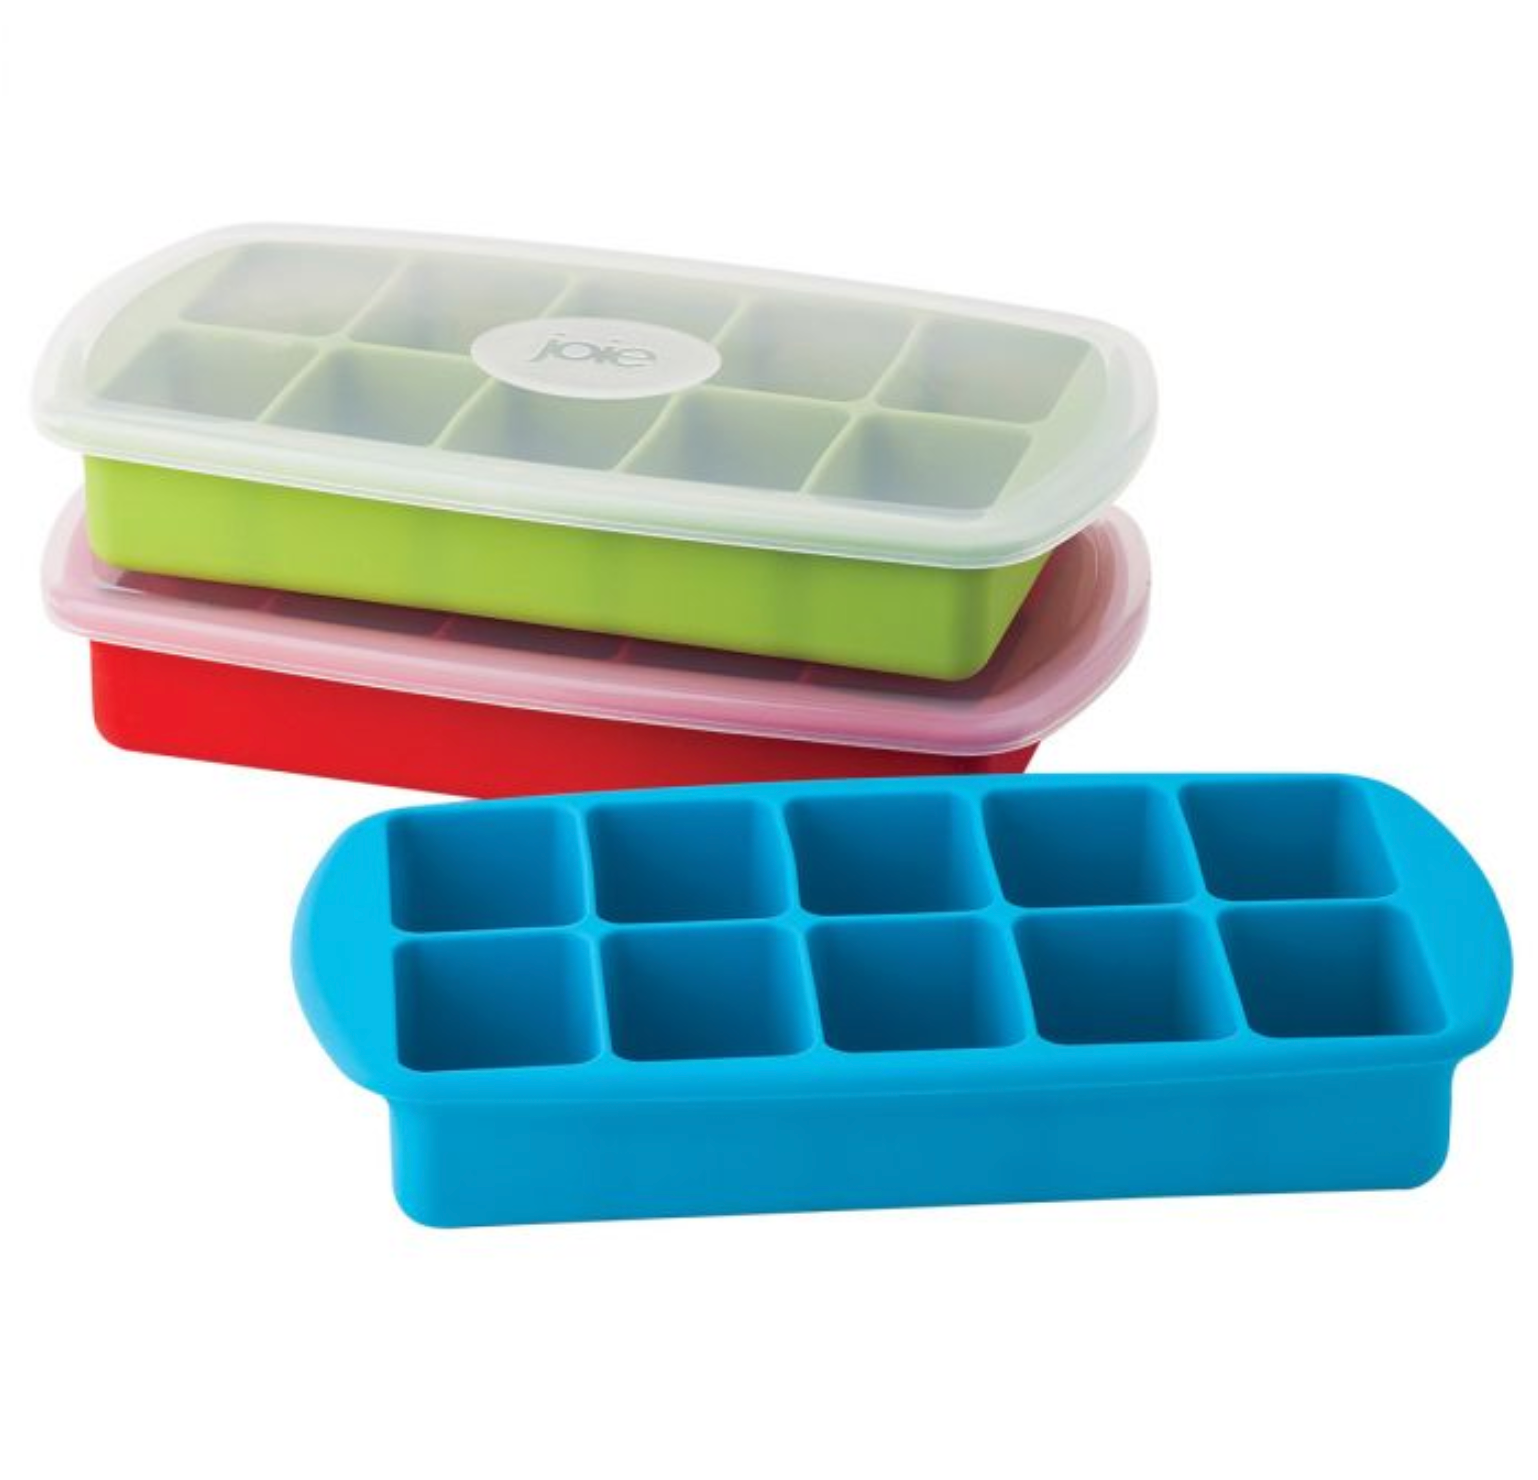 Joie Silicone 10 Slot Ice Cube Tray – Assorted Colors